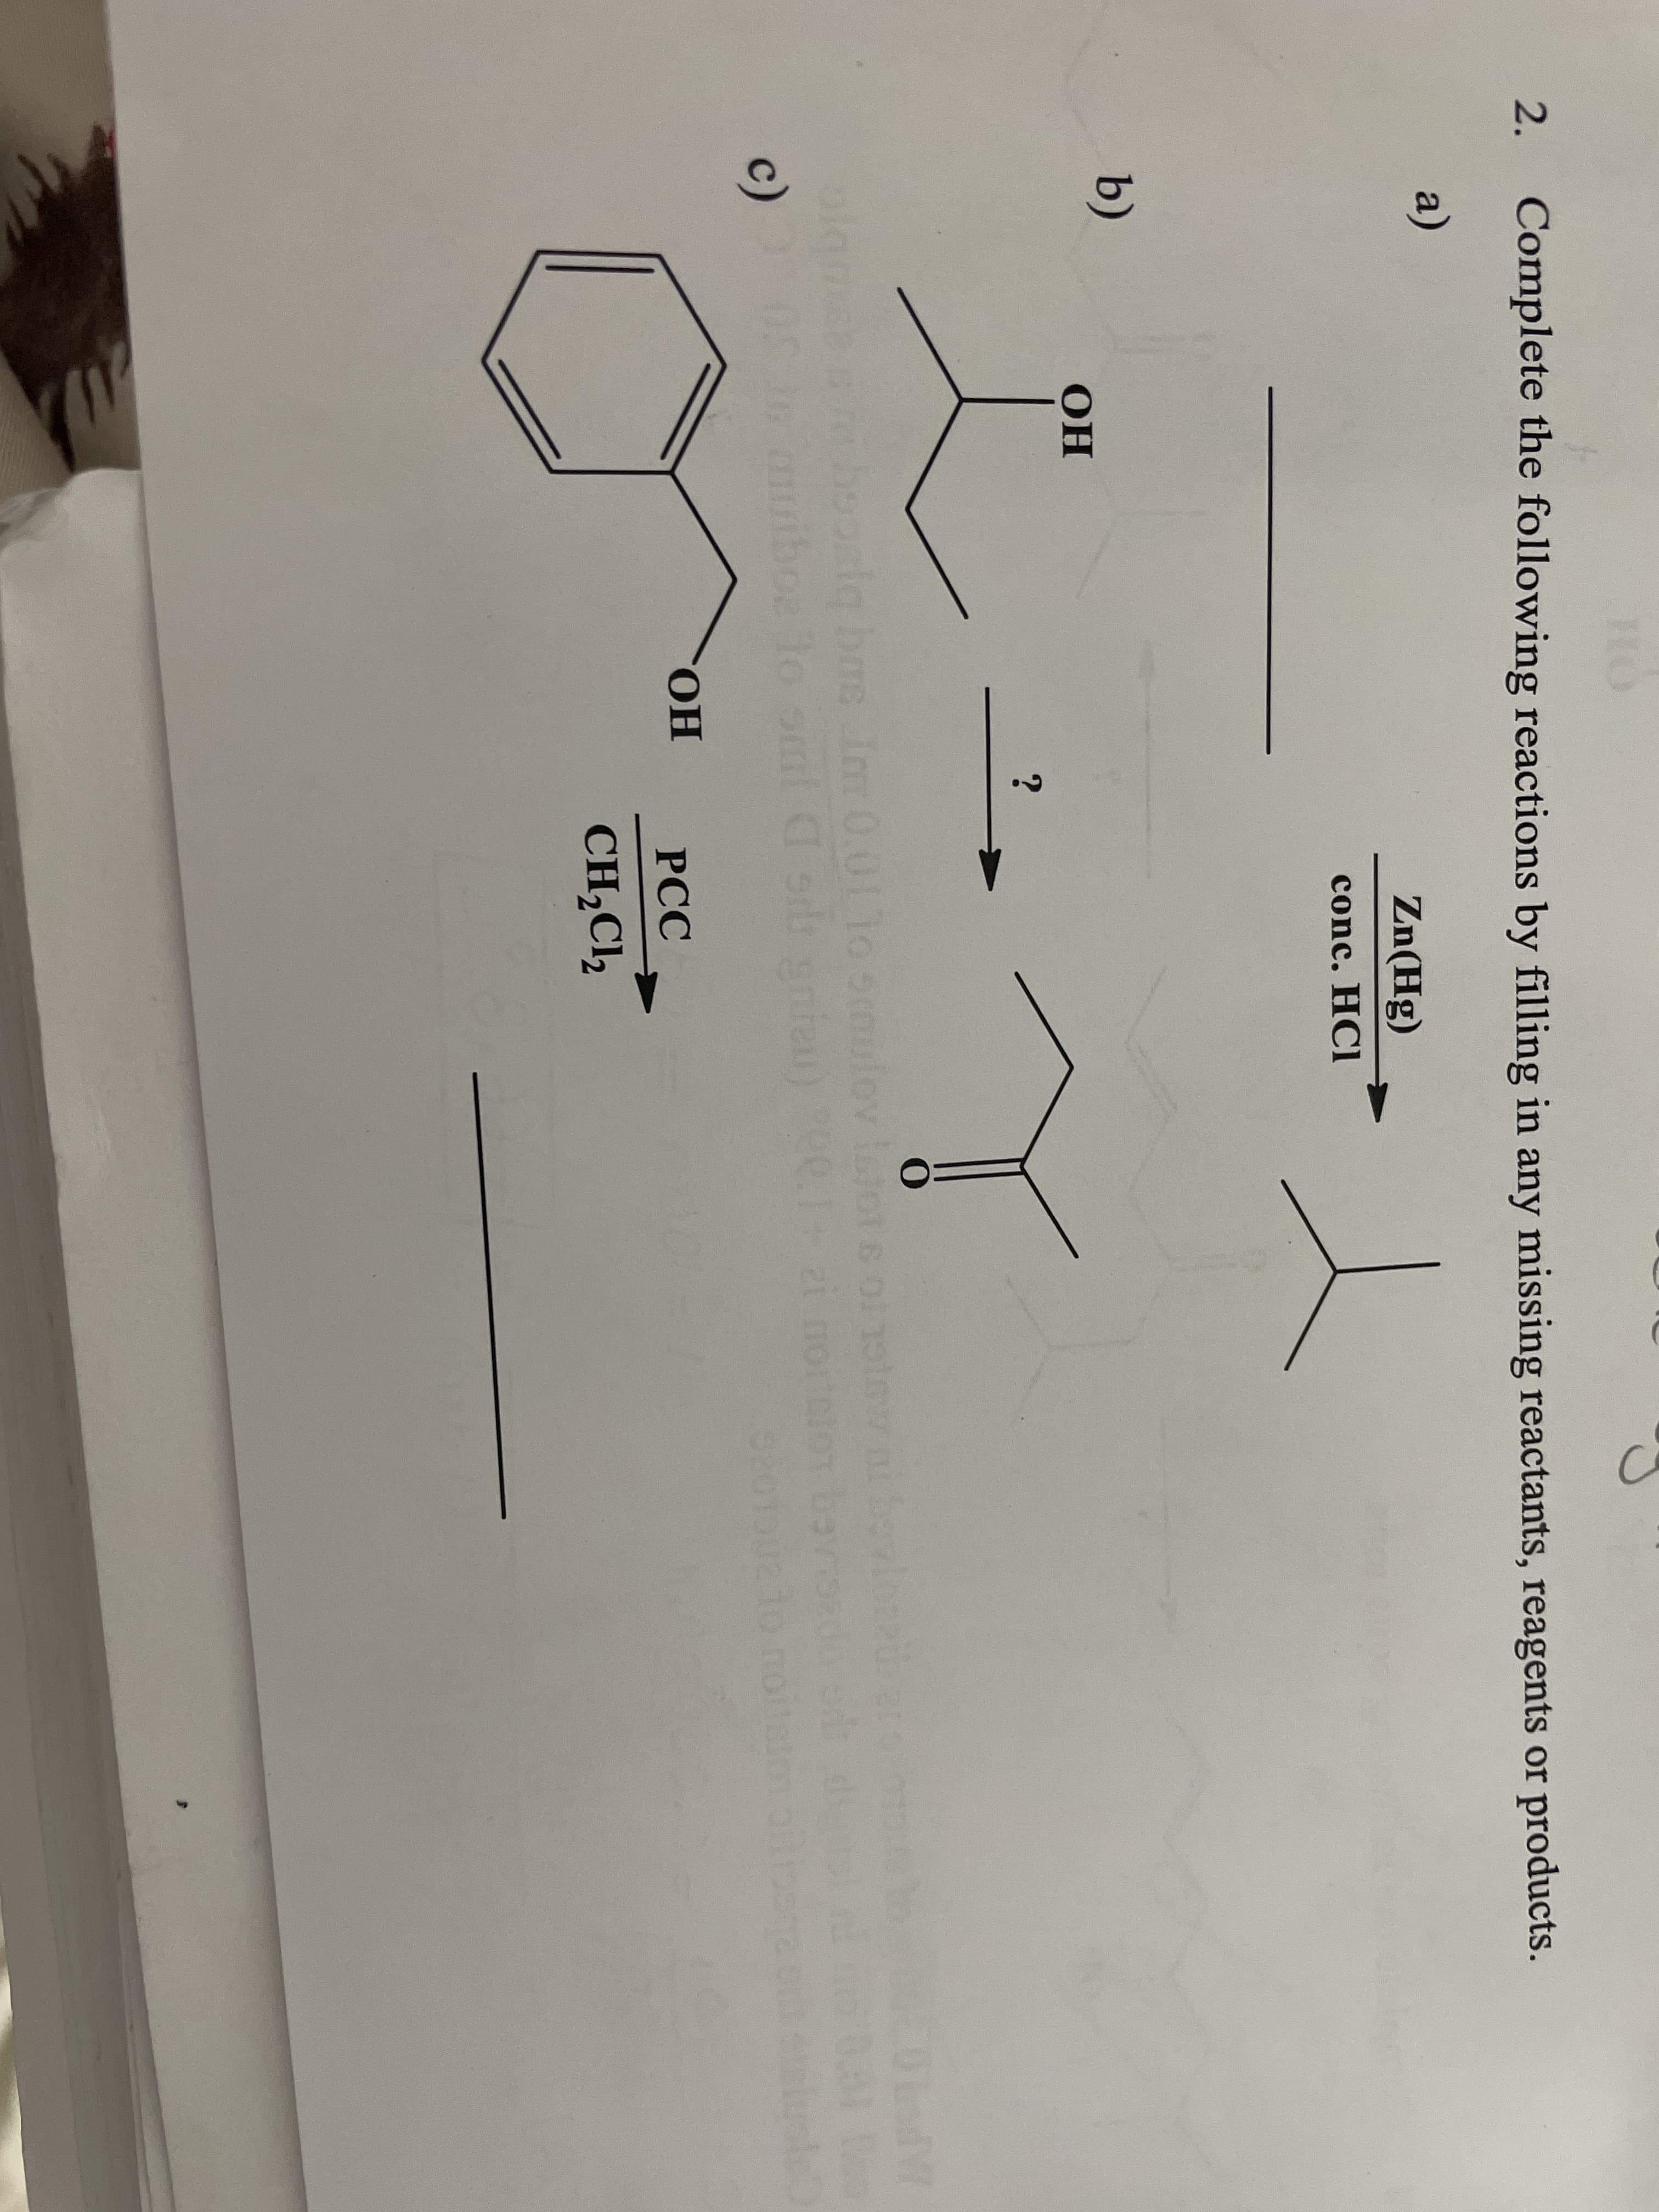 HO
2. Complete the following reactions by filling in any missing reactants, reagents or products.
a)
Zn(Hg)
conc. HCI
b)
OH
olamee hoosla bas im 0.011o om
me Im 0.01 1o smulov
c)
awiboa lo omnl C sid gnien)
to omi
010
CHO.
РСС
CH,Cl,
